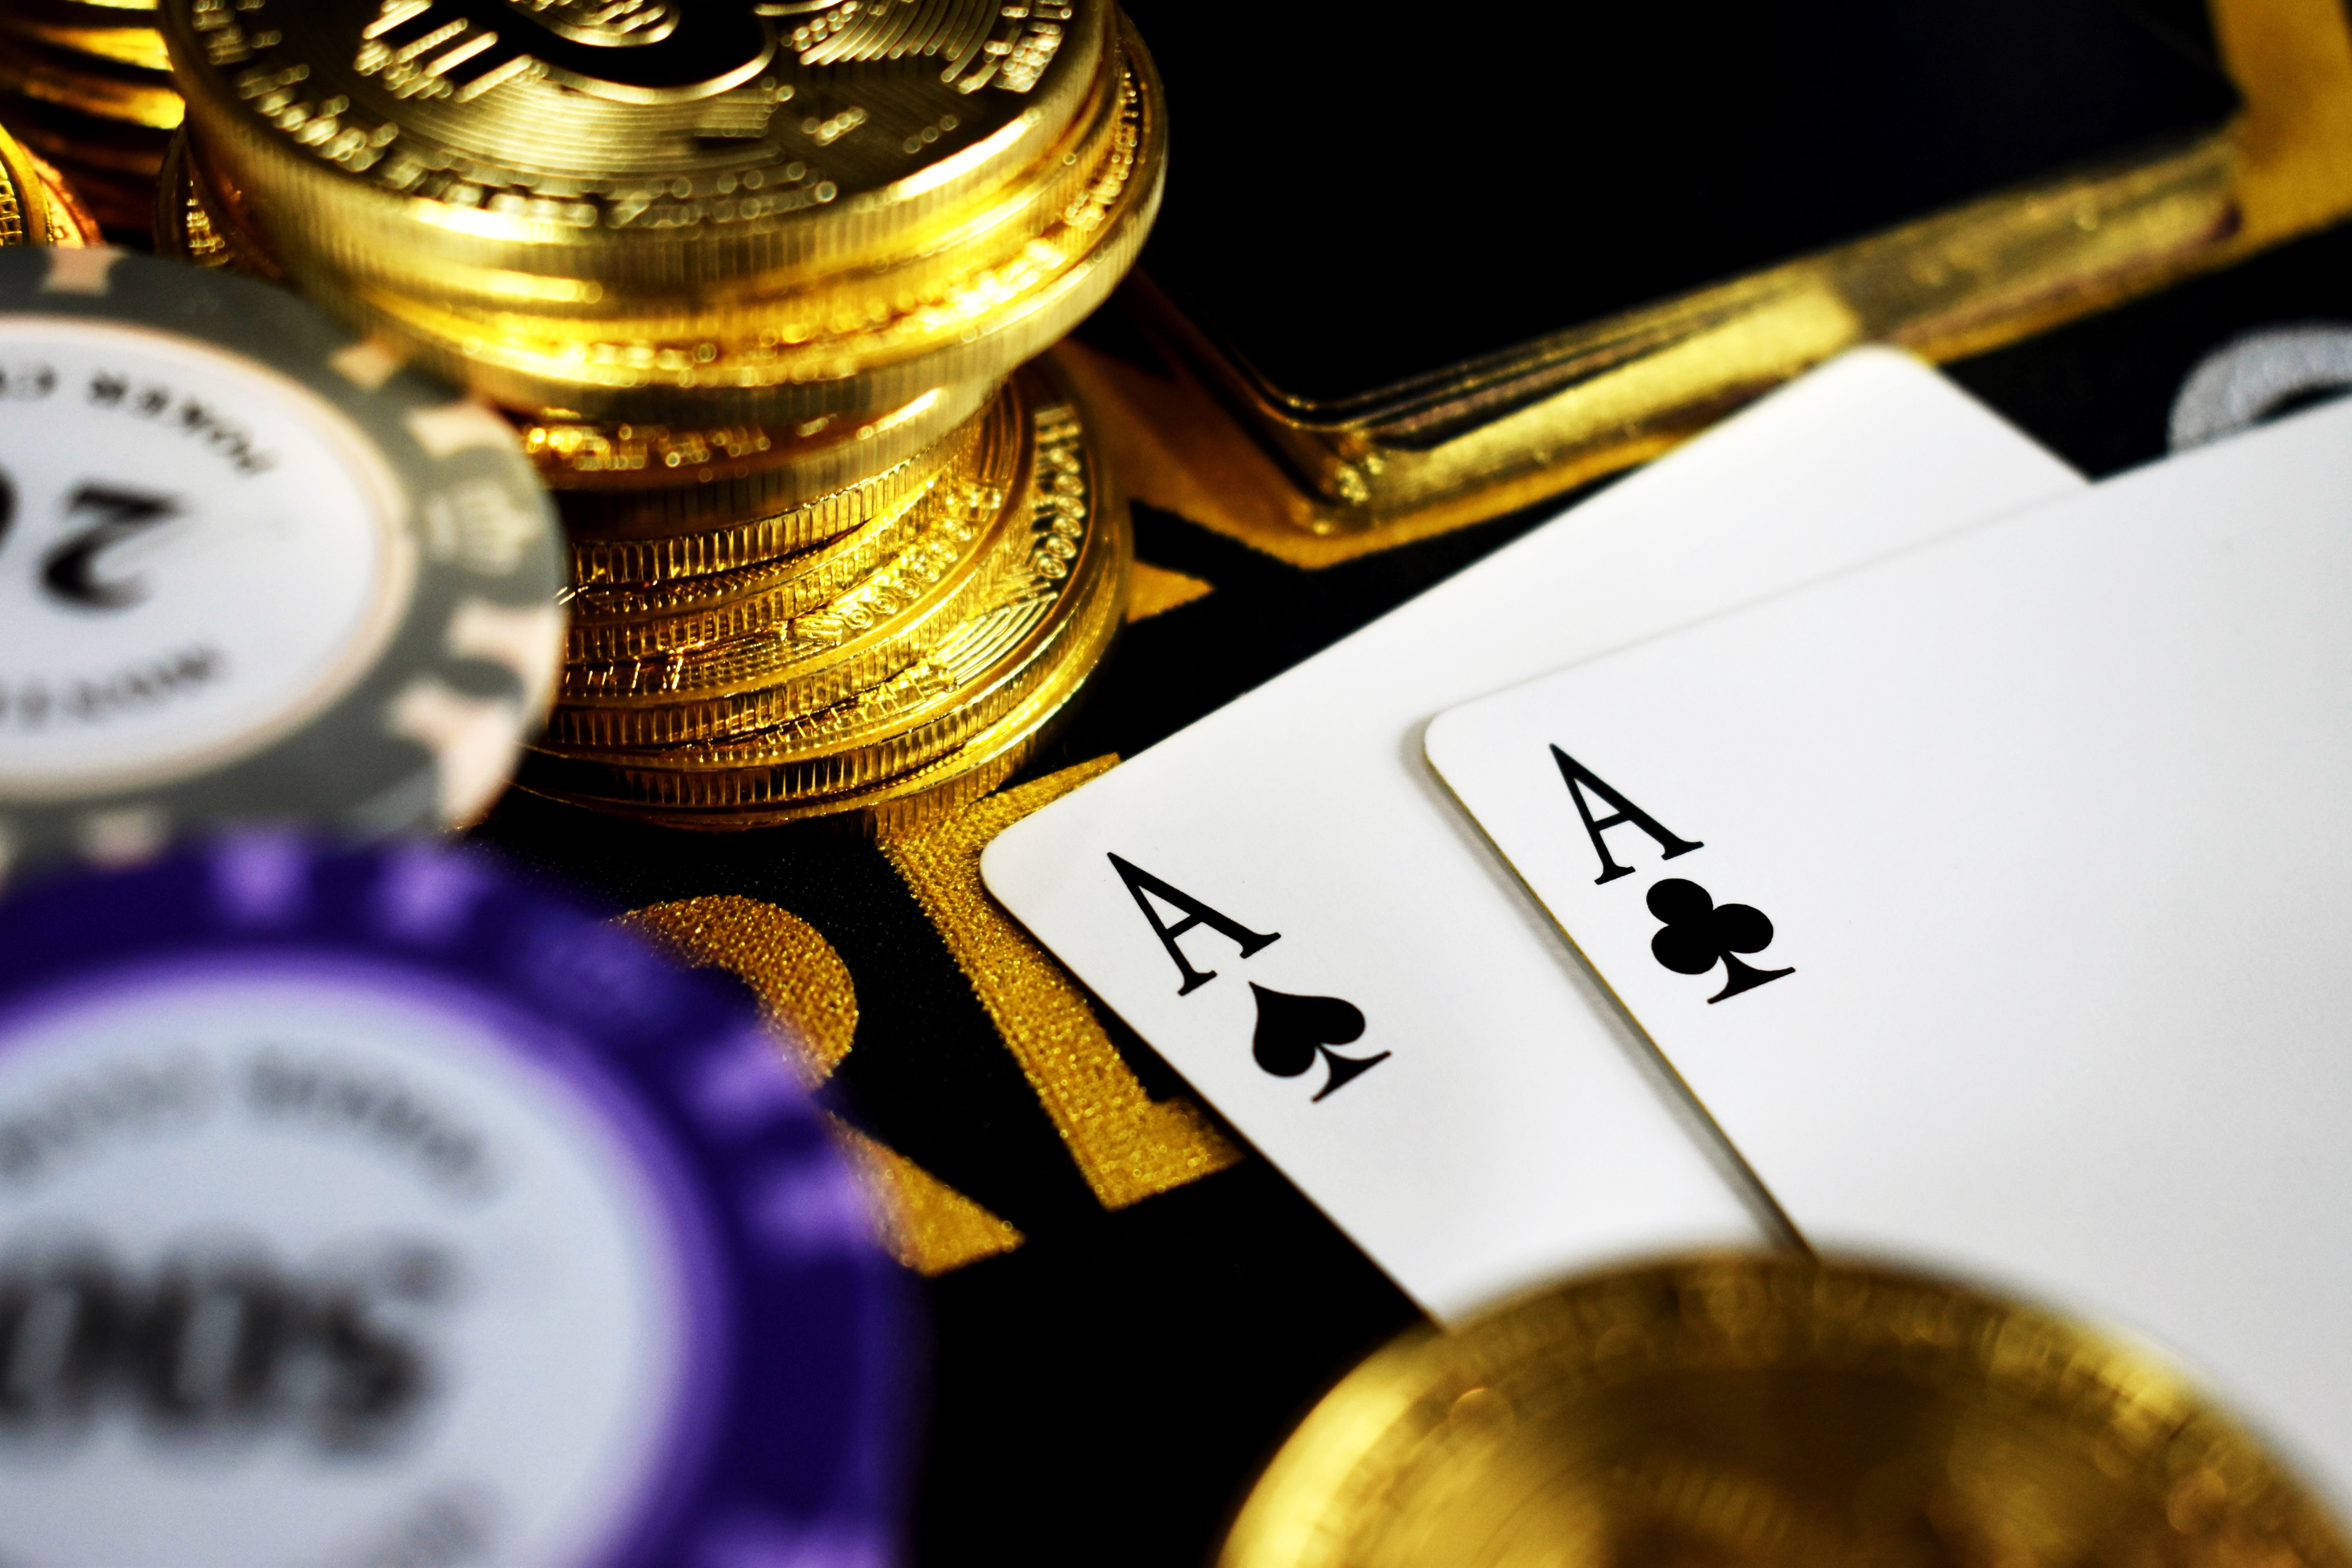 All there is to know about gambling winnings and taxes in the USA